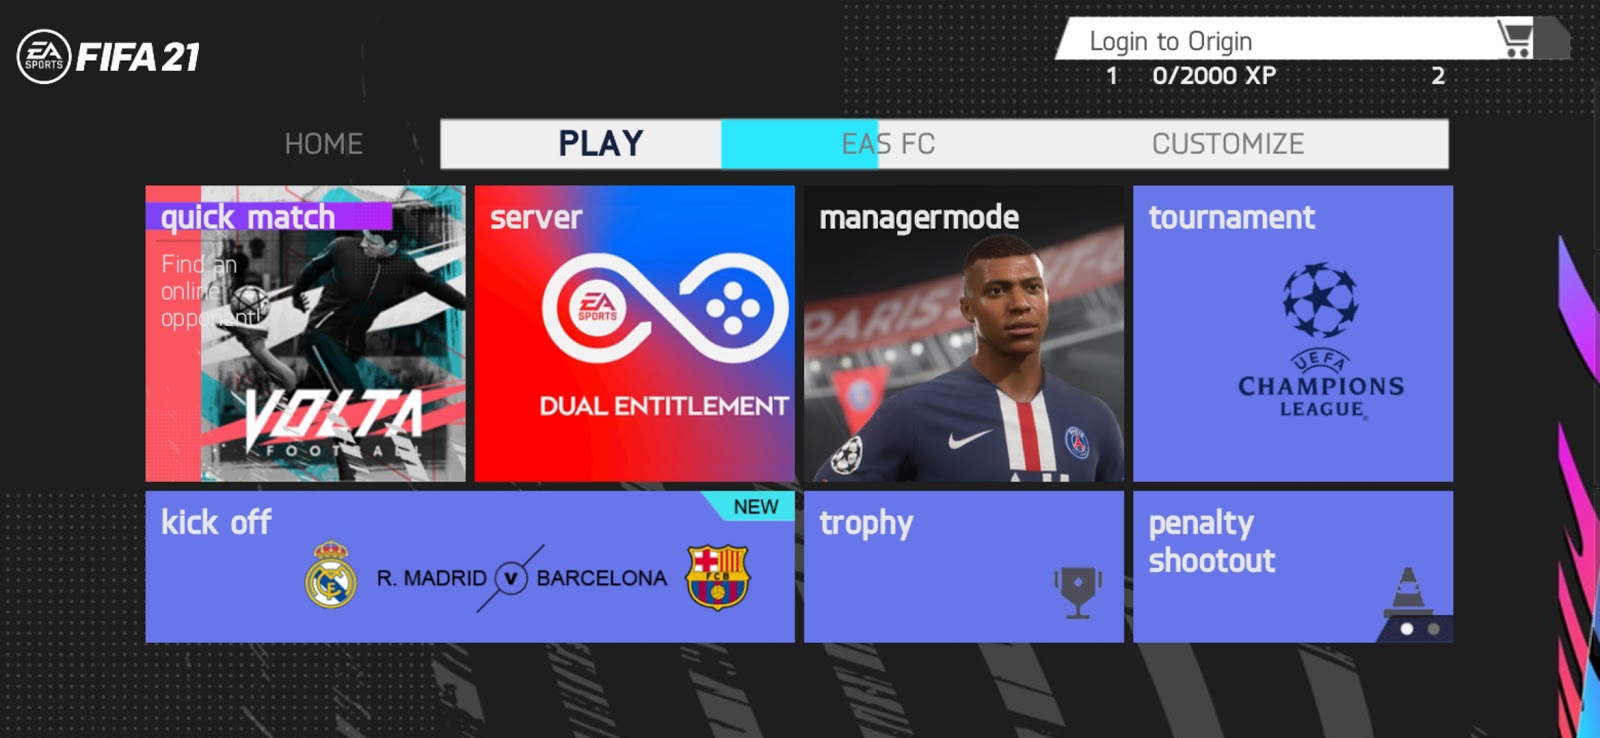 PES GROUP PPSSPP  Fifa 21 Mod PS5 Android Offline APK+OBB Best